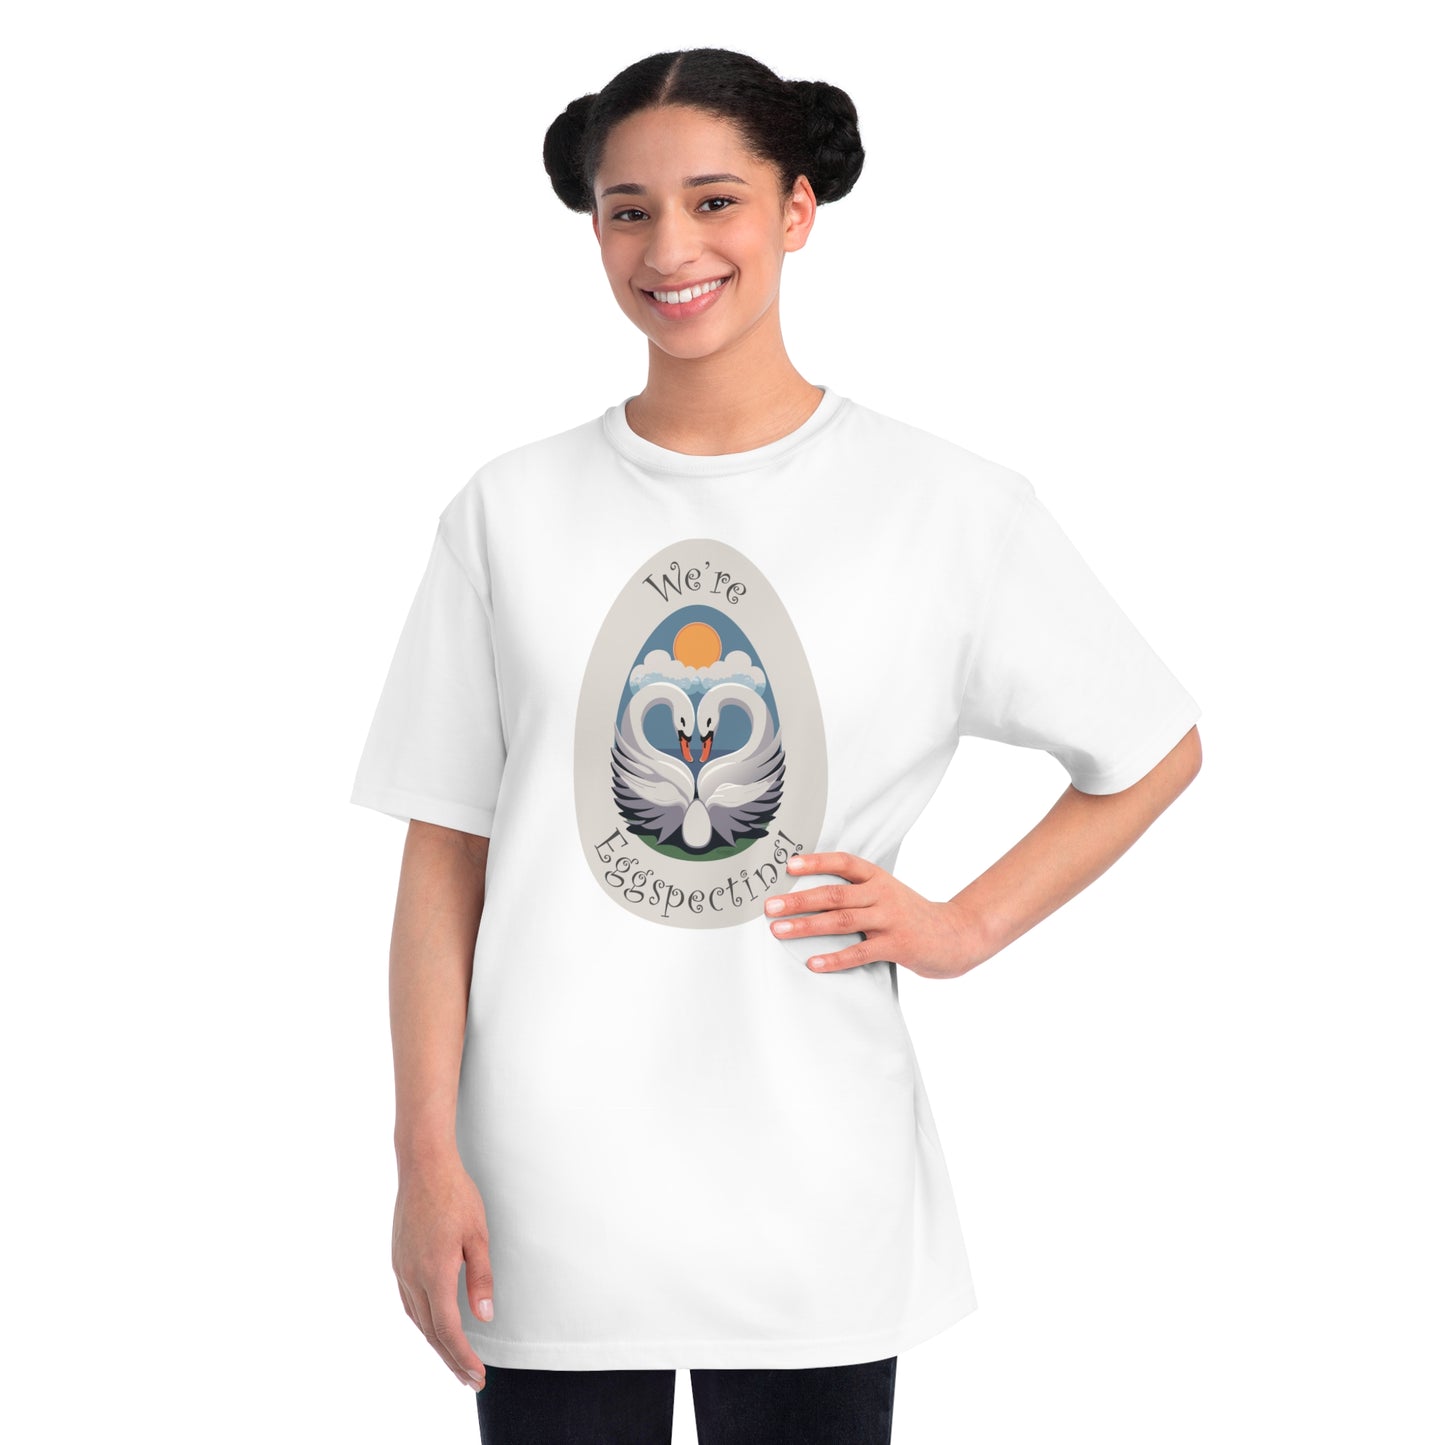 Celebrate New Arrivals in Eco-Conscious Style with Our "We're Eggspecting!" Organic Unisex T-Shirts